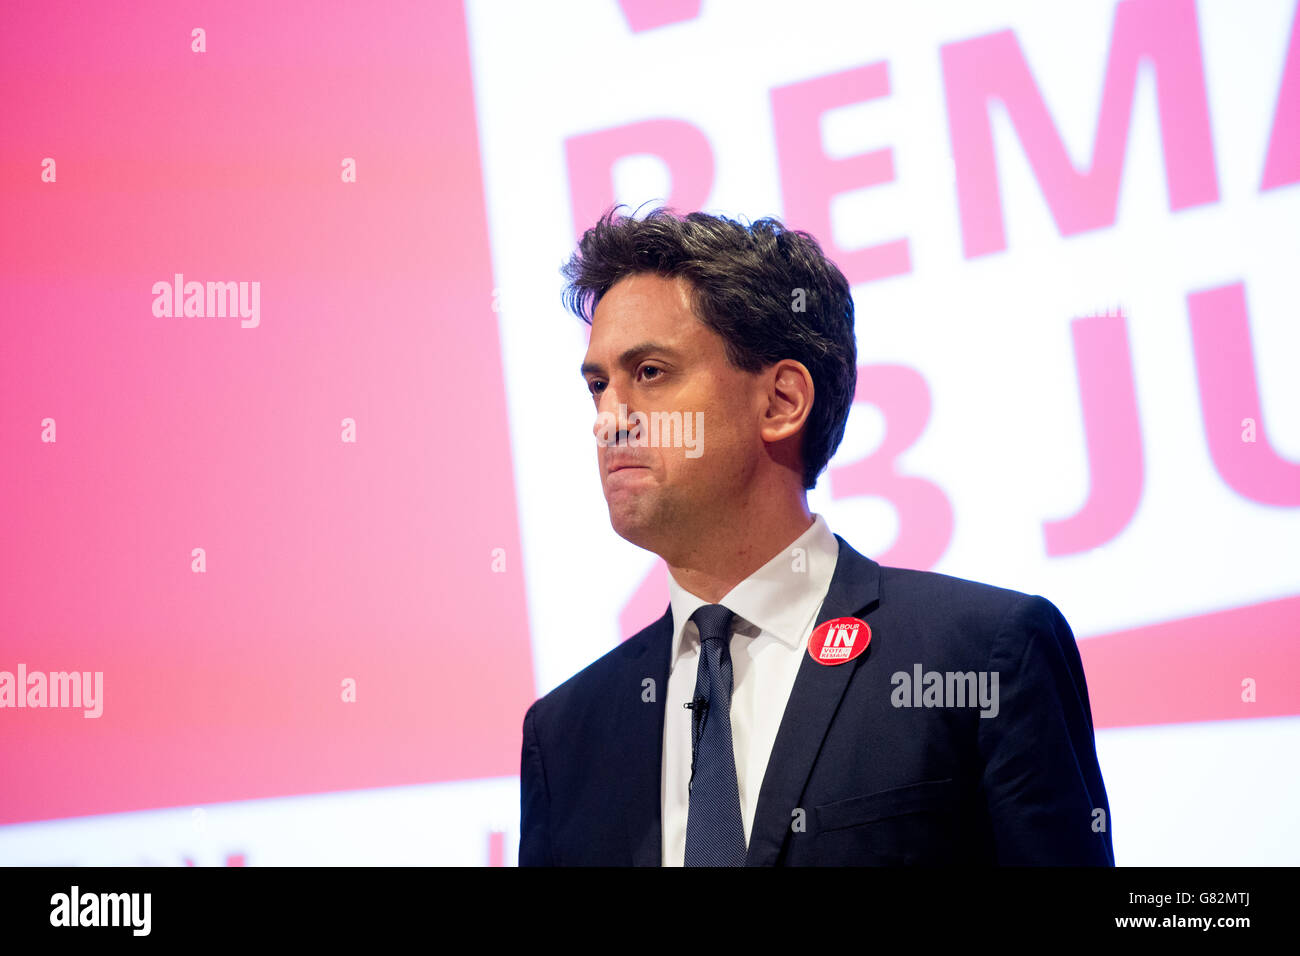 Former leader of the Labour party Ed (Edward) Miliband speaking at a meeting of the Remain party during the Referendum. Stock Photo